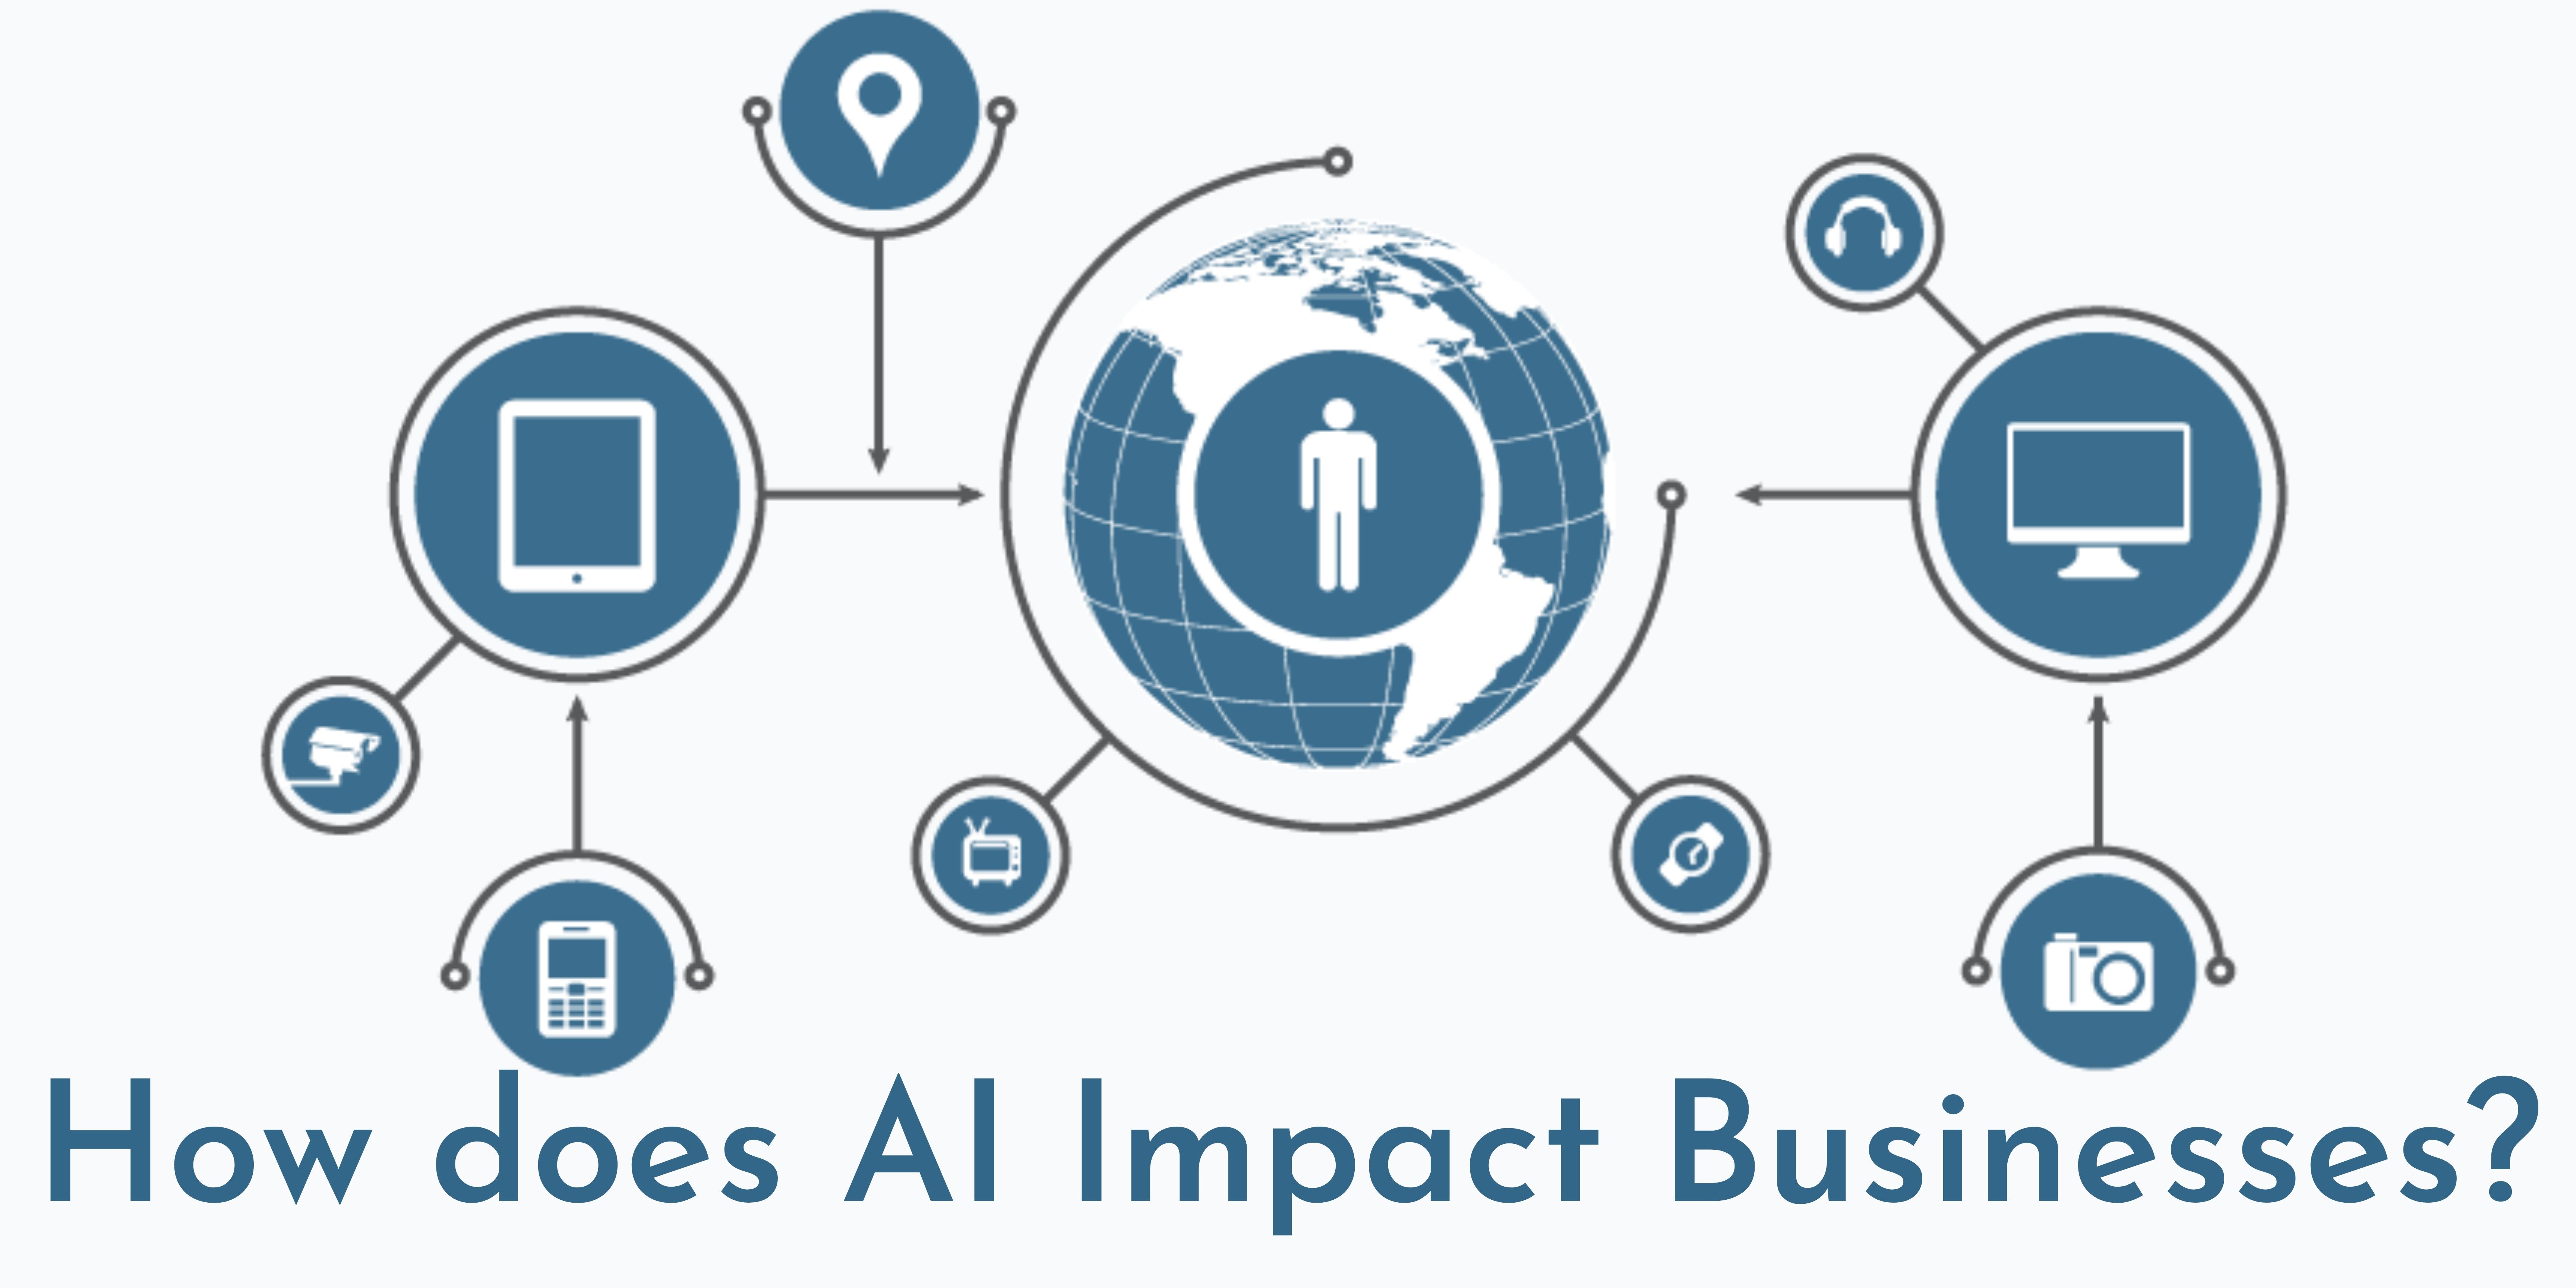 AI in business | Banner showing how different economic sectors are interconnected through AI features